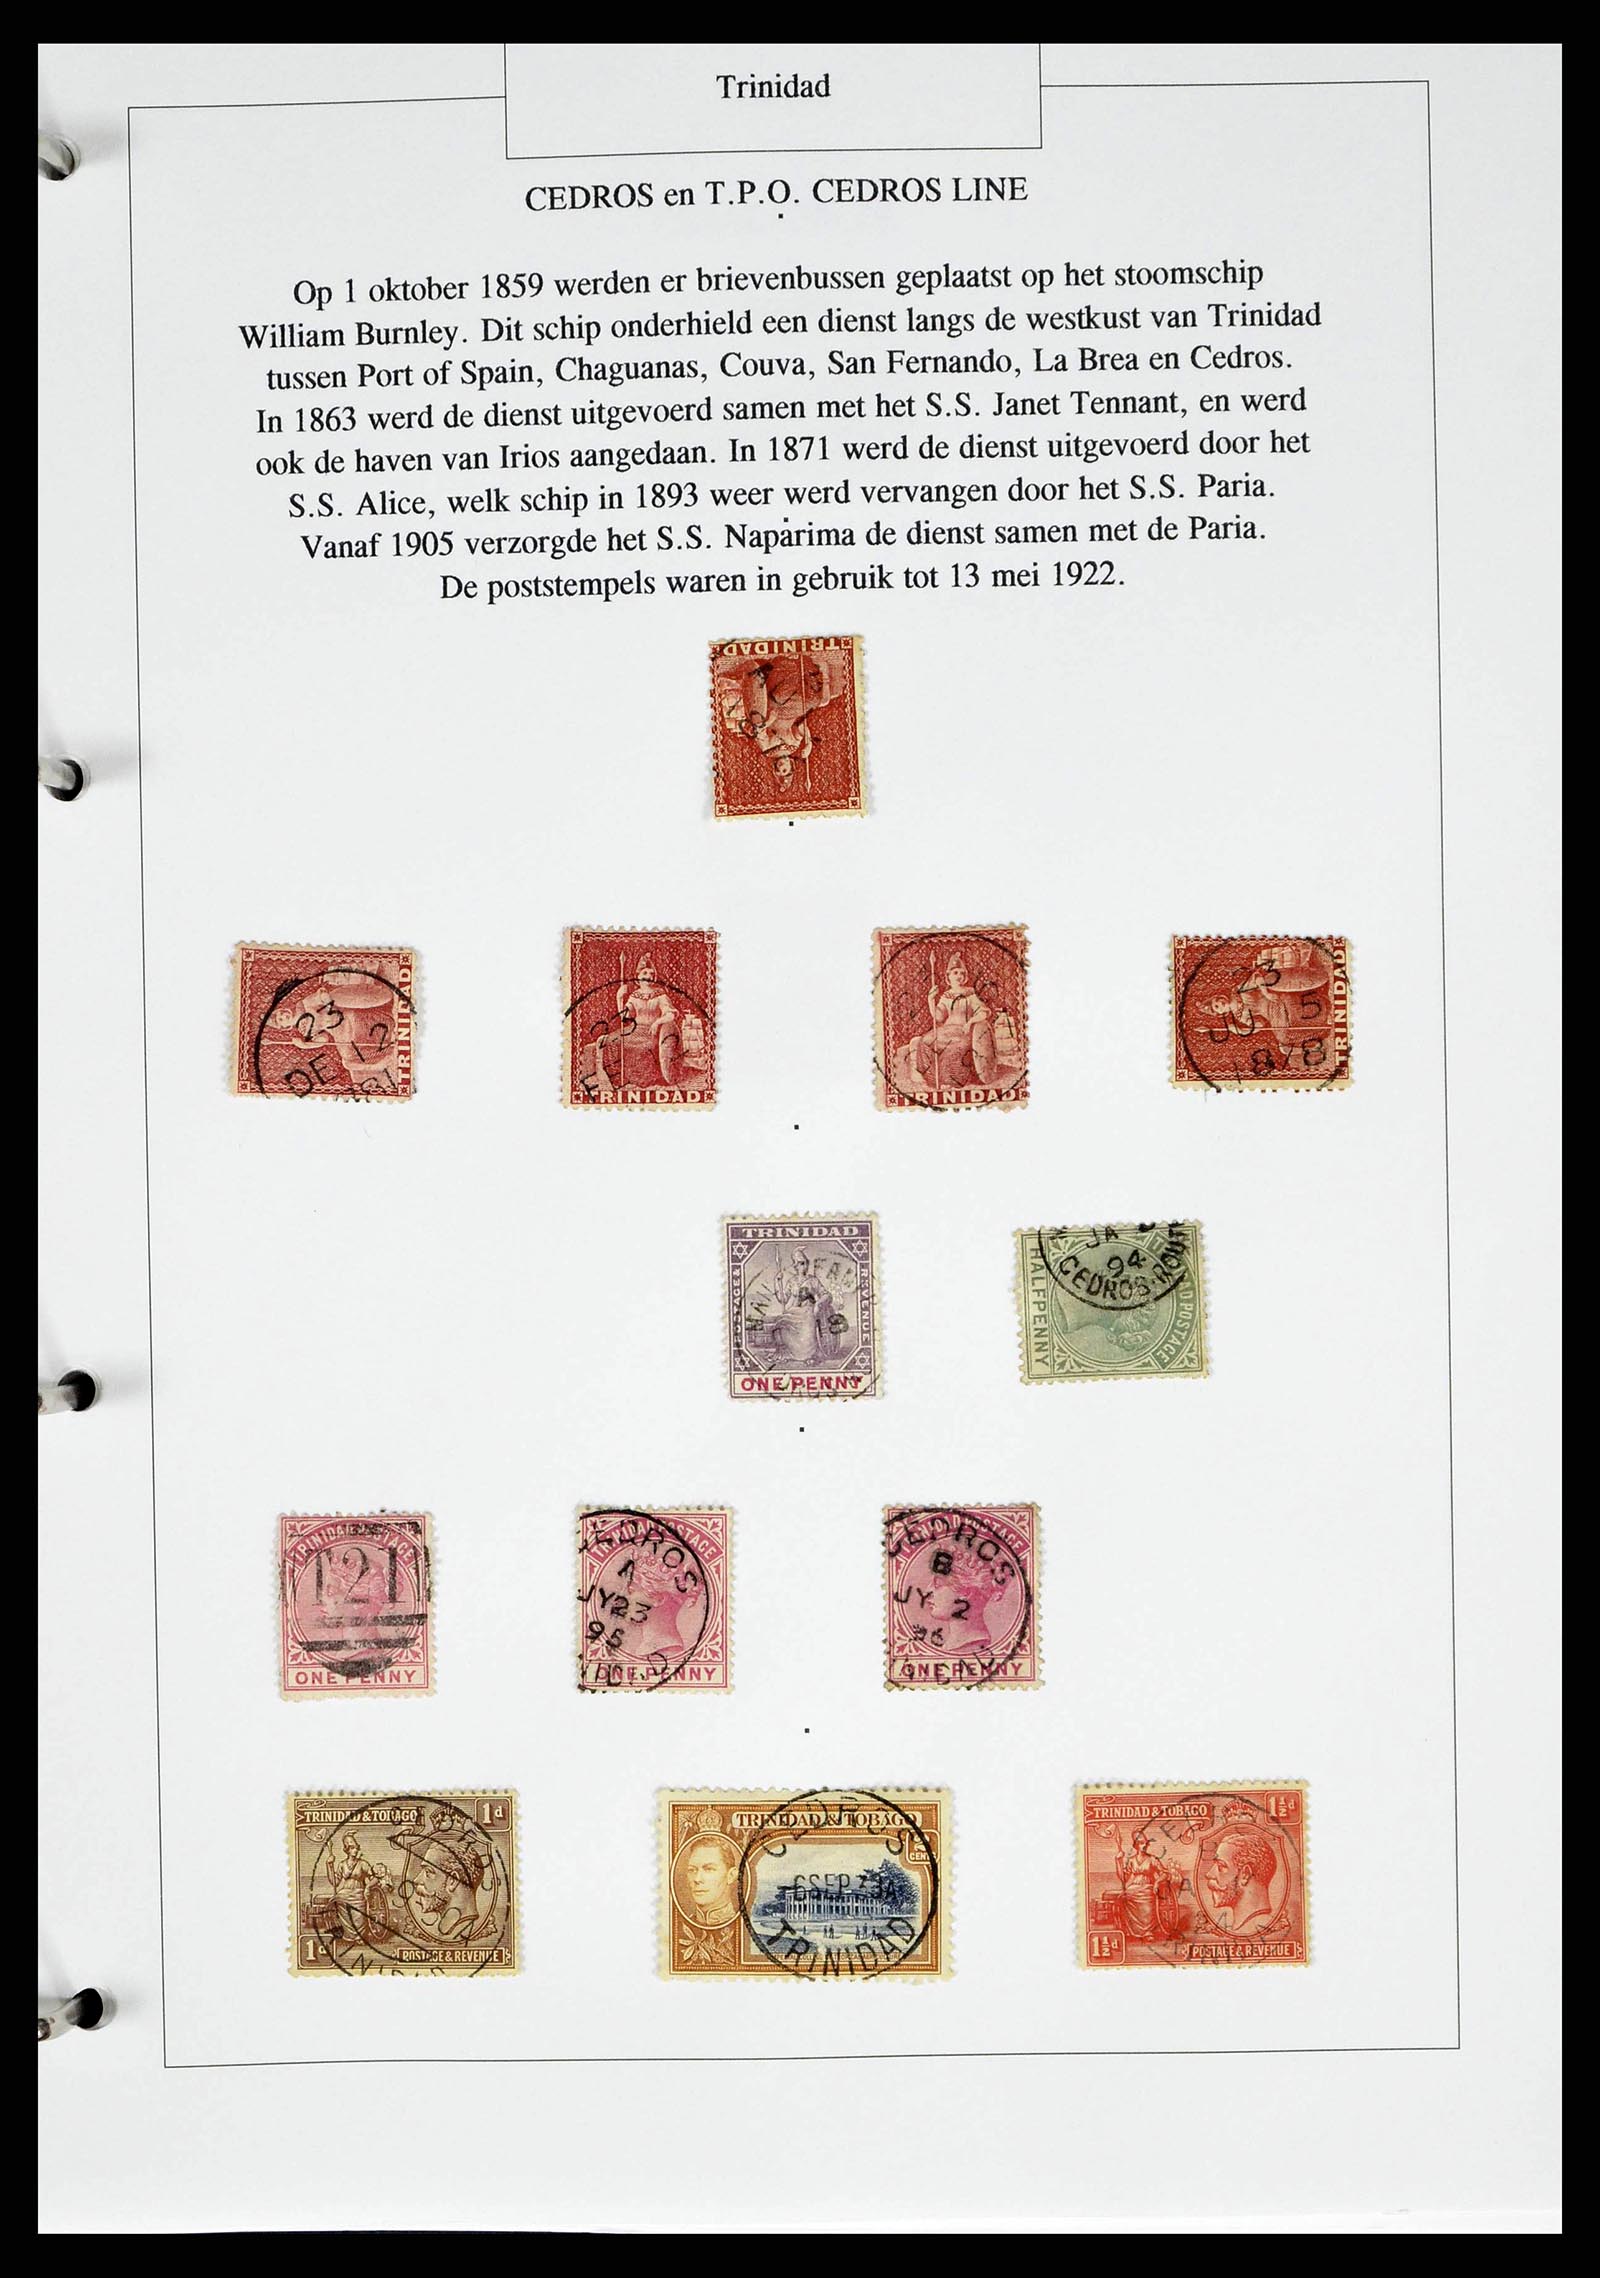 38481 0020 - Stamp collection 38481 Trinidad and Tobago cancels 1859-1960.